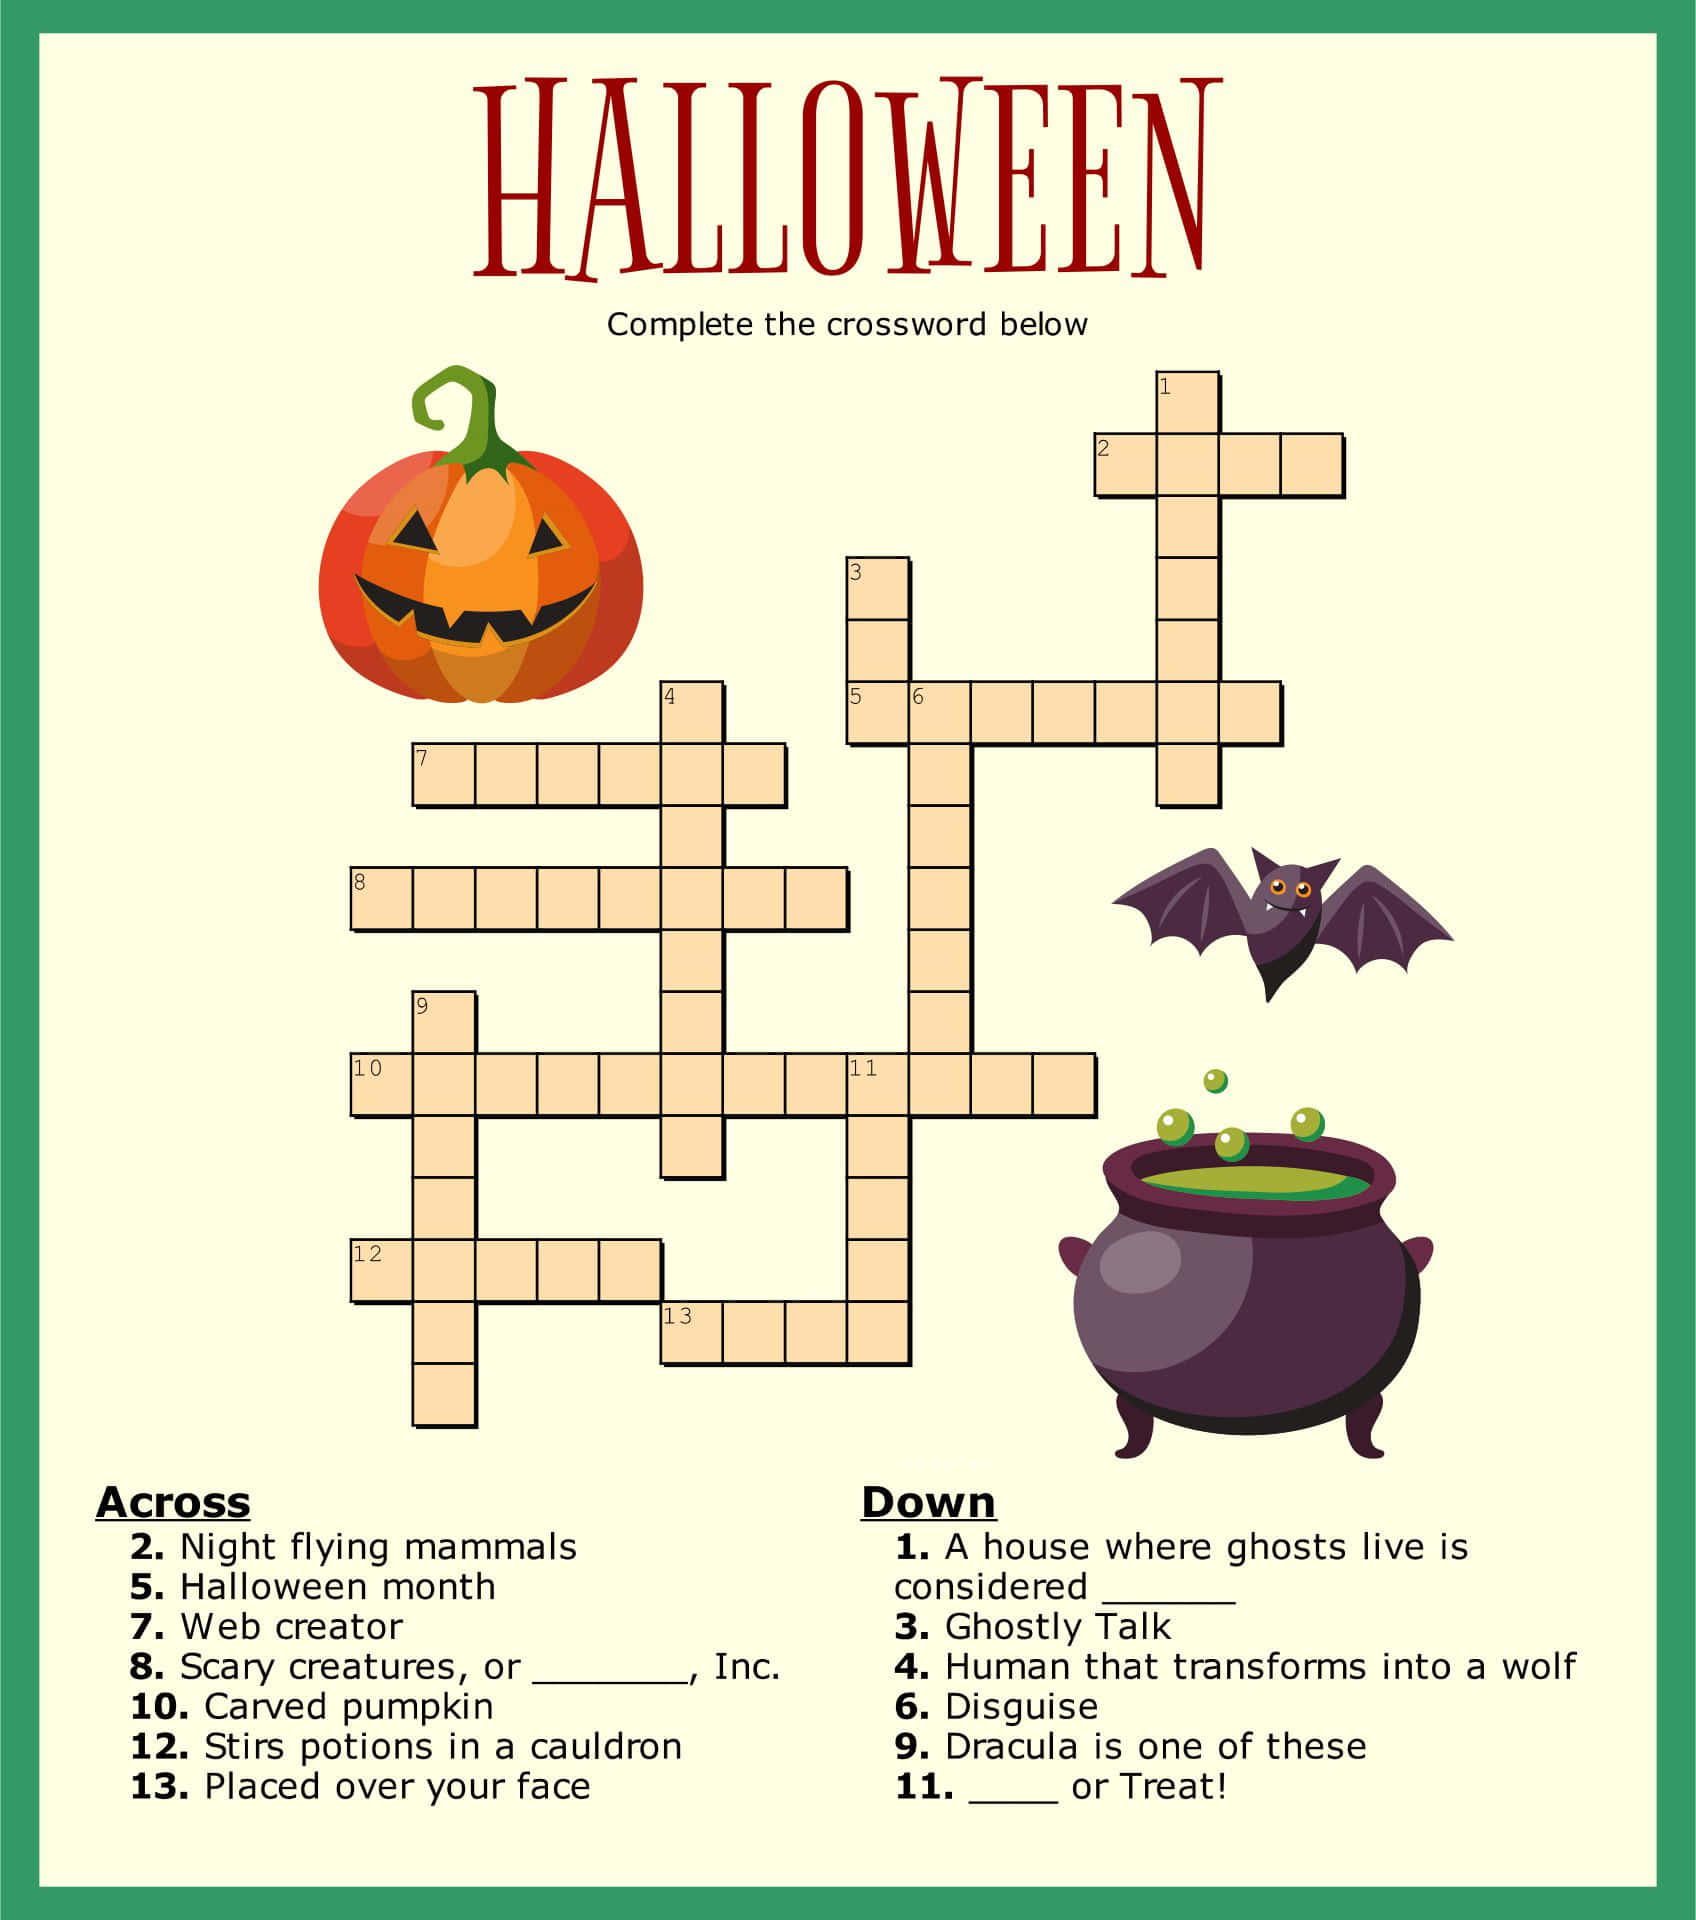 Put Your Brain to the Test With These Spooky Halloween Puzzles Wallpaper